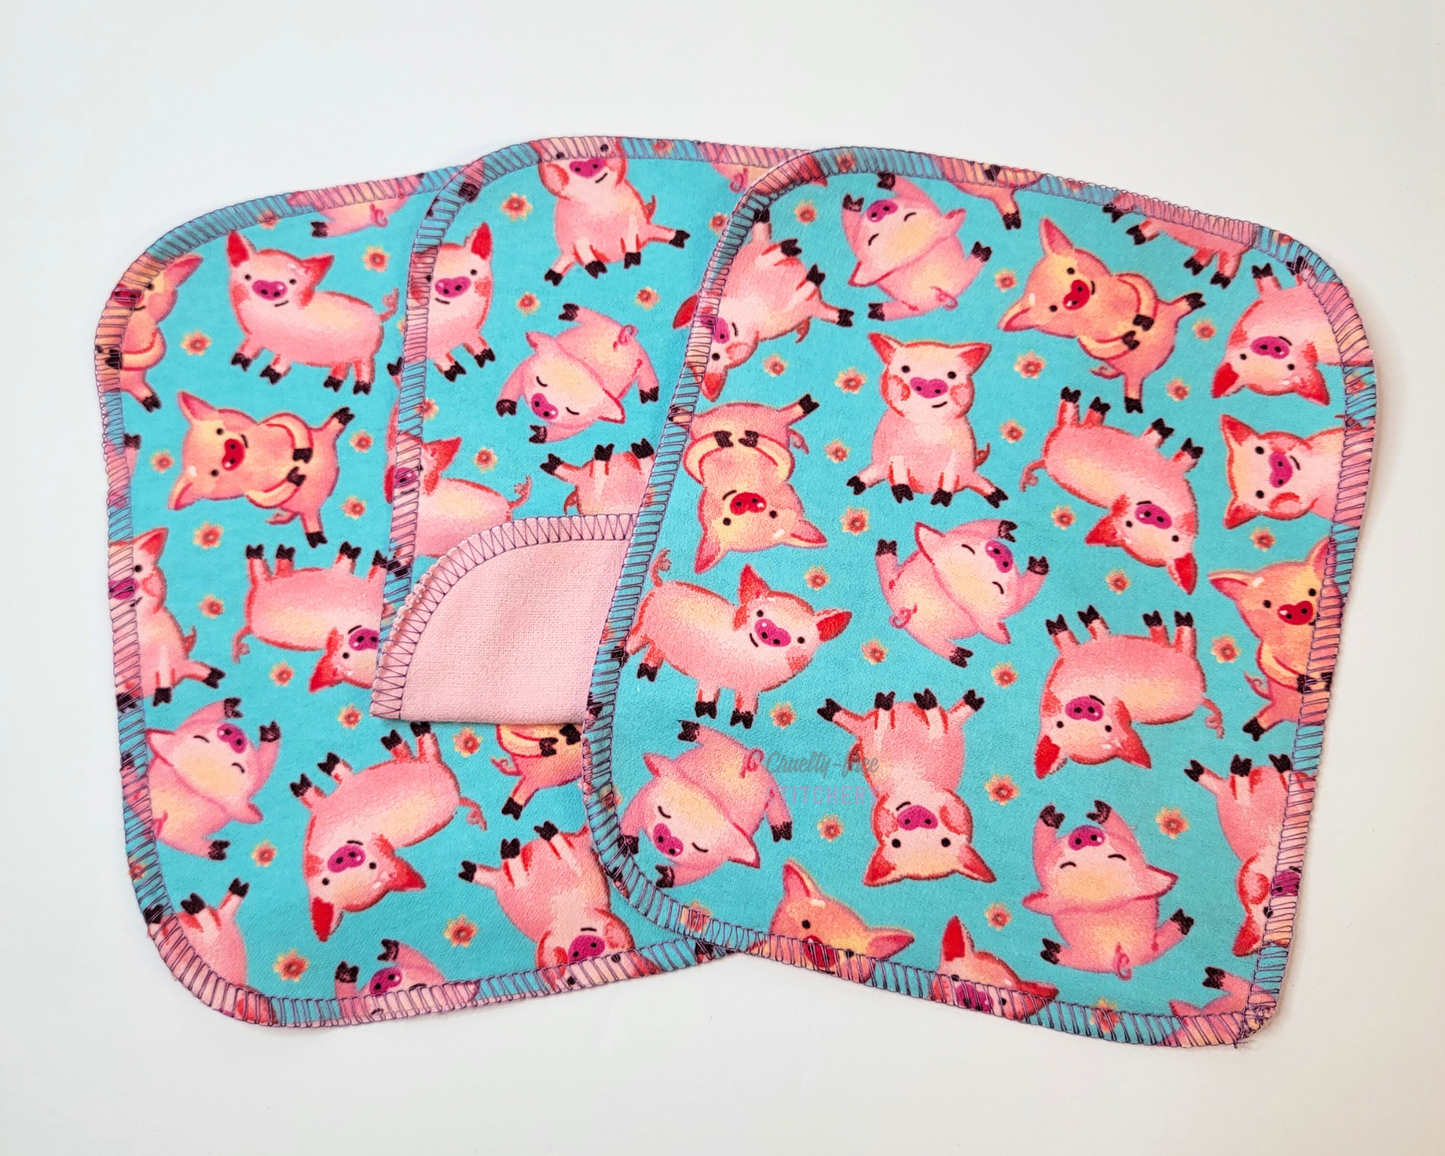 Blue Pigs Reusable Cloth Wipes. Three wipes laid out, with the center one folded back to show the opposite side is light pink. They are a bright aqua blue with small pink pigs and tiny pink flowers. 